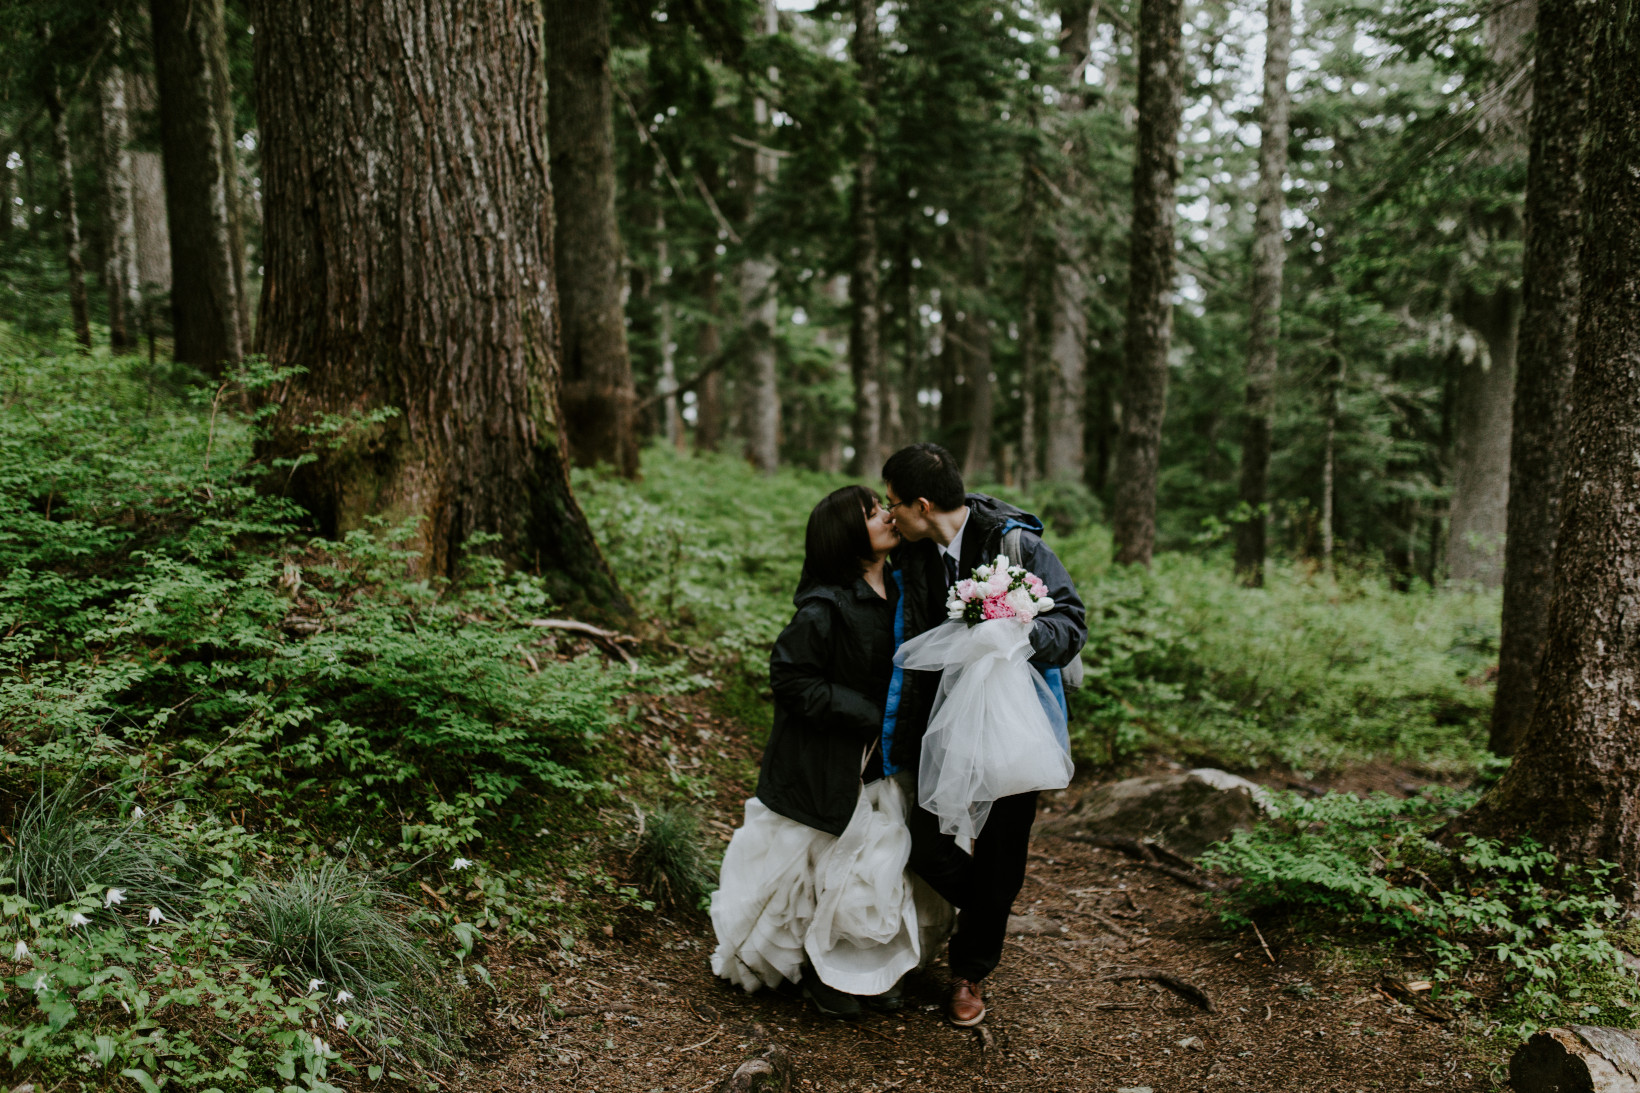 Alex and Valerie kiss as they walk toward Mount Hood in Oregon. Elopement wedding photography at Mount Hood by Sienna Plus Josh.